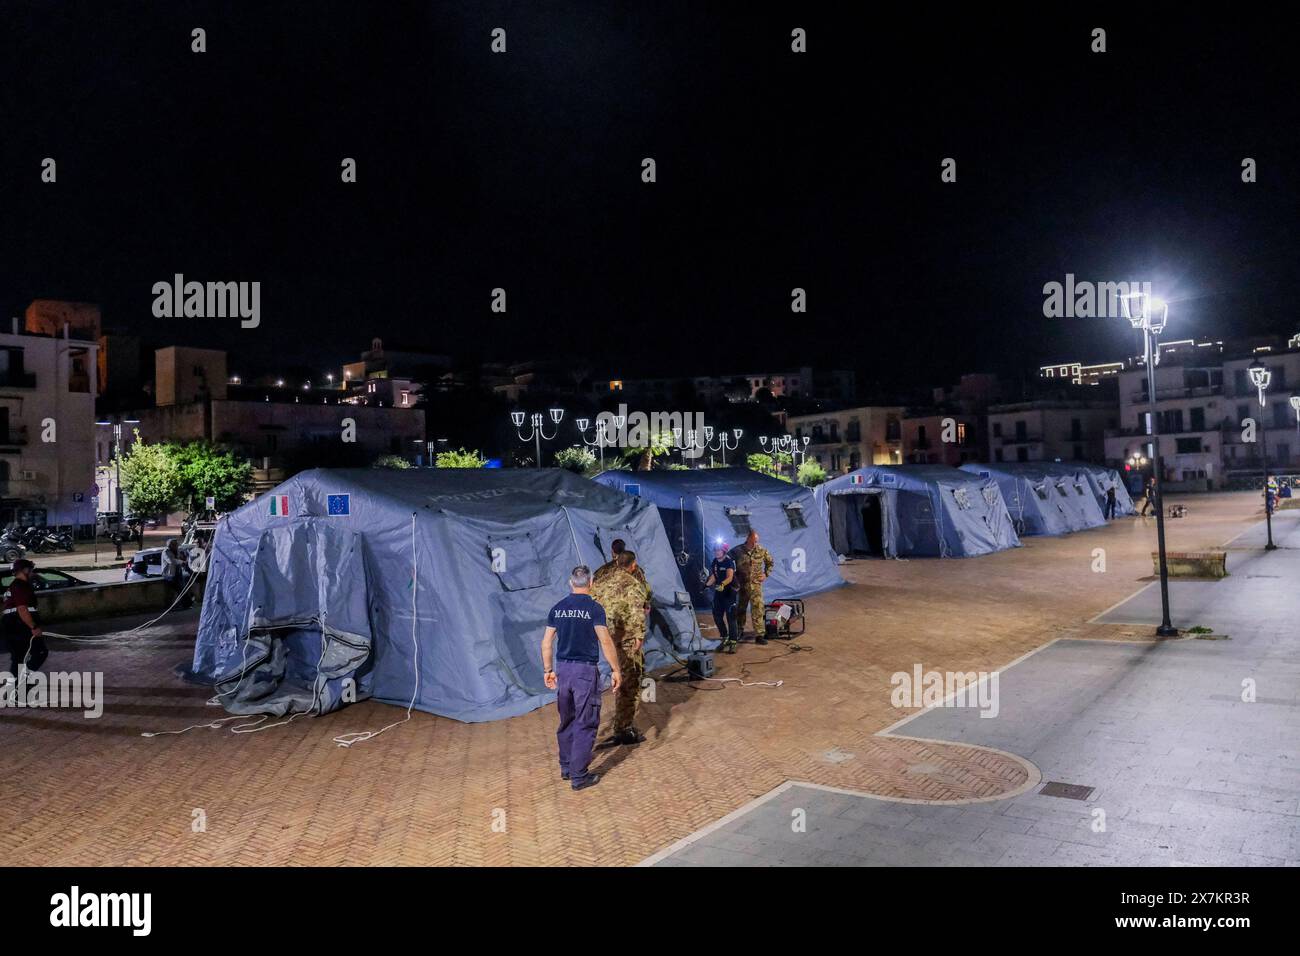 Italy: Campi Flegrei, bradisismo Campania s civil protection set up a tensile structure at the port of pozzuoli for people who are not confident about returning to their homes after the earthquake tremors, near Naples, southern Italy, 20 May 2024. The tremor that occurred at 8.10pm with epicentre in the Campi Flegrei was of magnitude 4.4. This was reported by the National Institute of Geophysics and Volcanology, according to which the depth of the quake was three kilometres. ABP02078 Copyright: xAntonioxBalascox Stock Photo